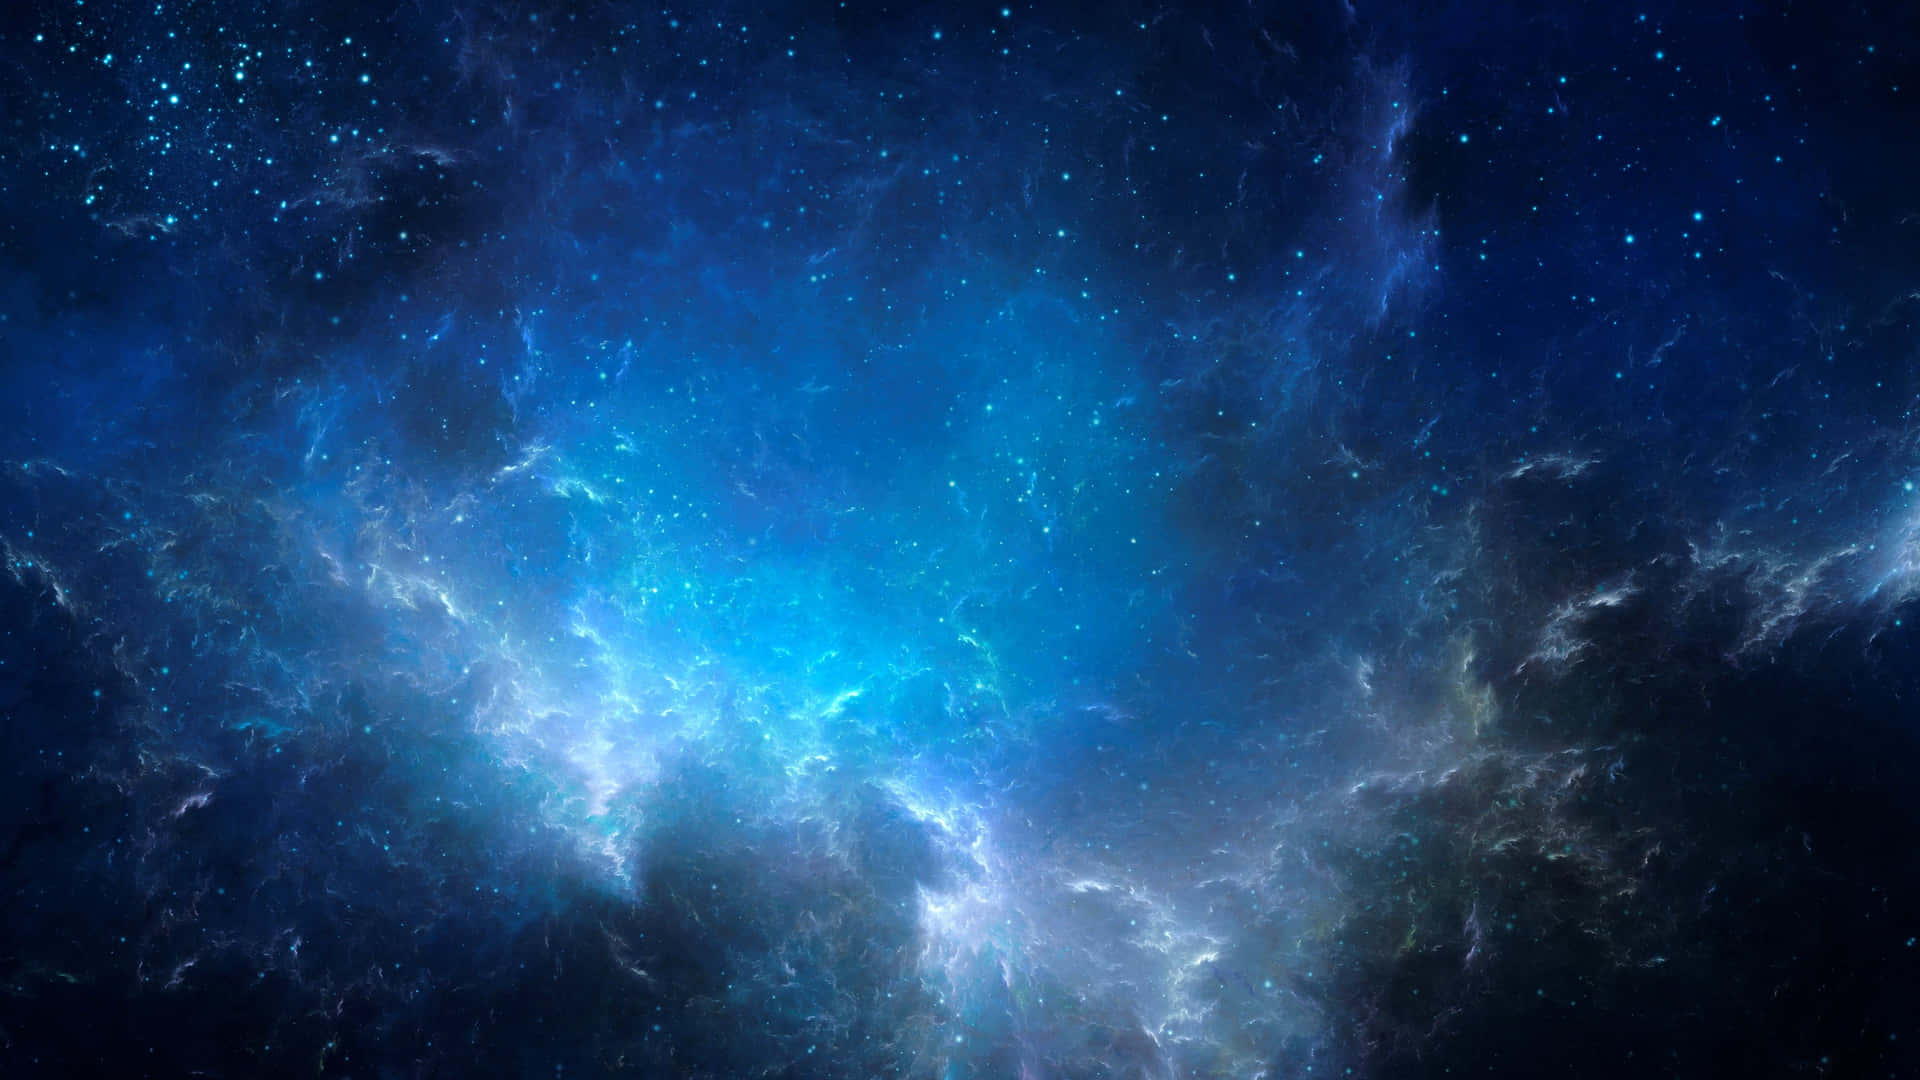 A Blue Space With Stars And Clouds Wallpaper